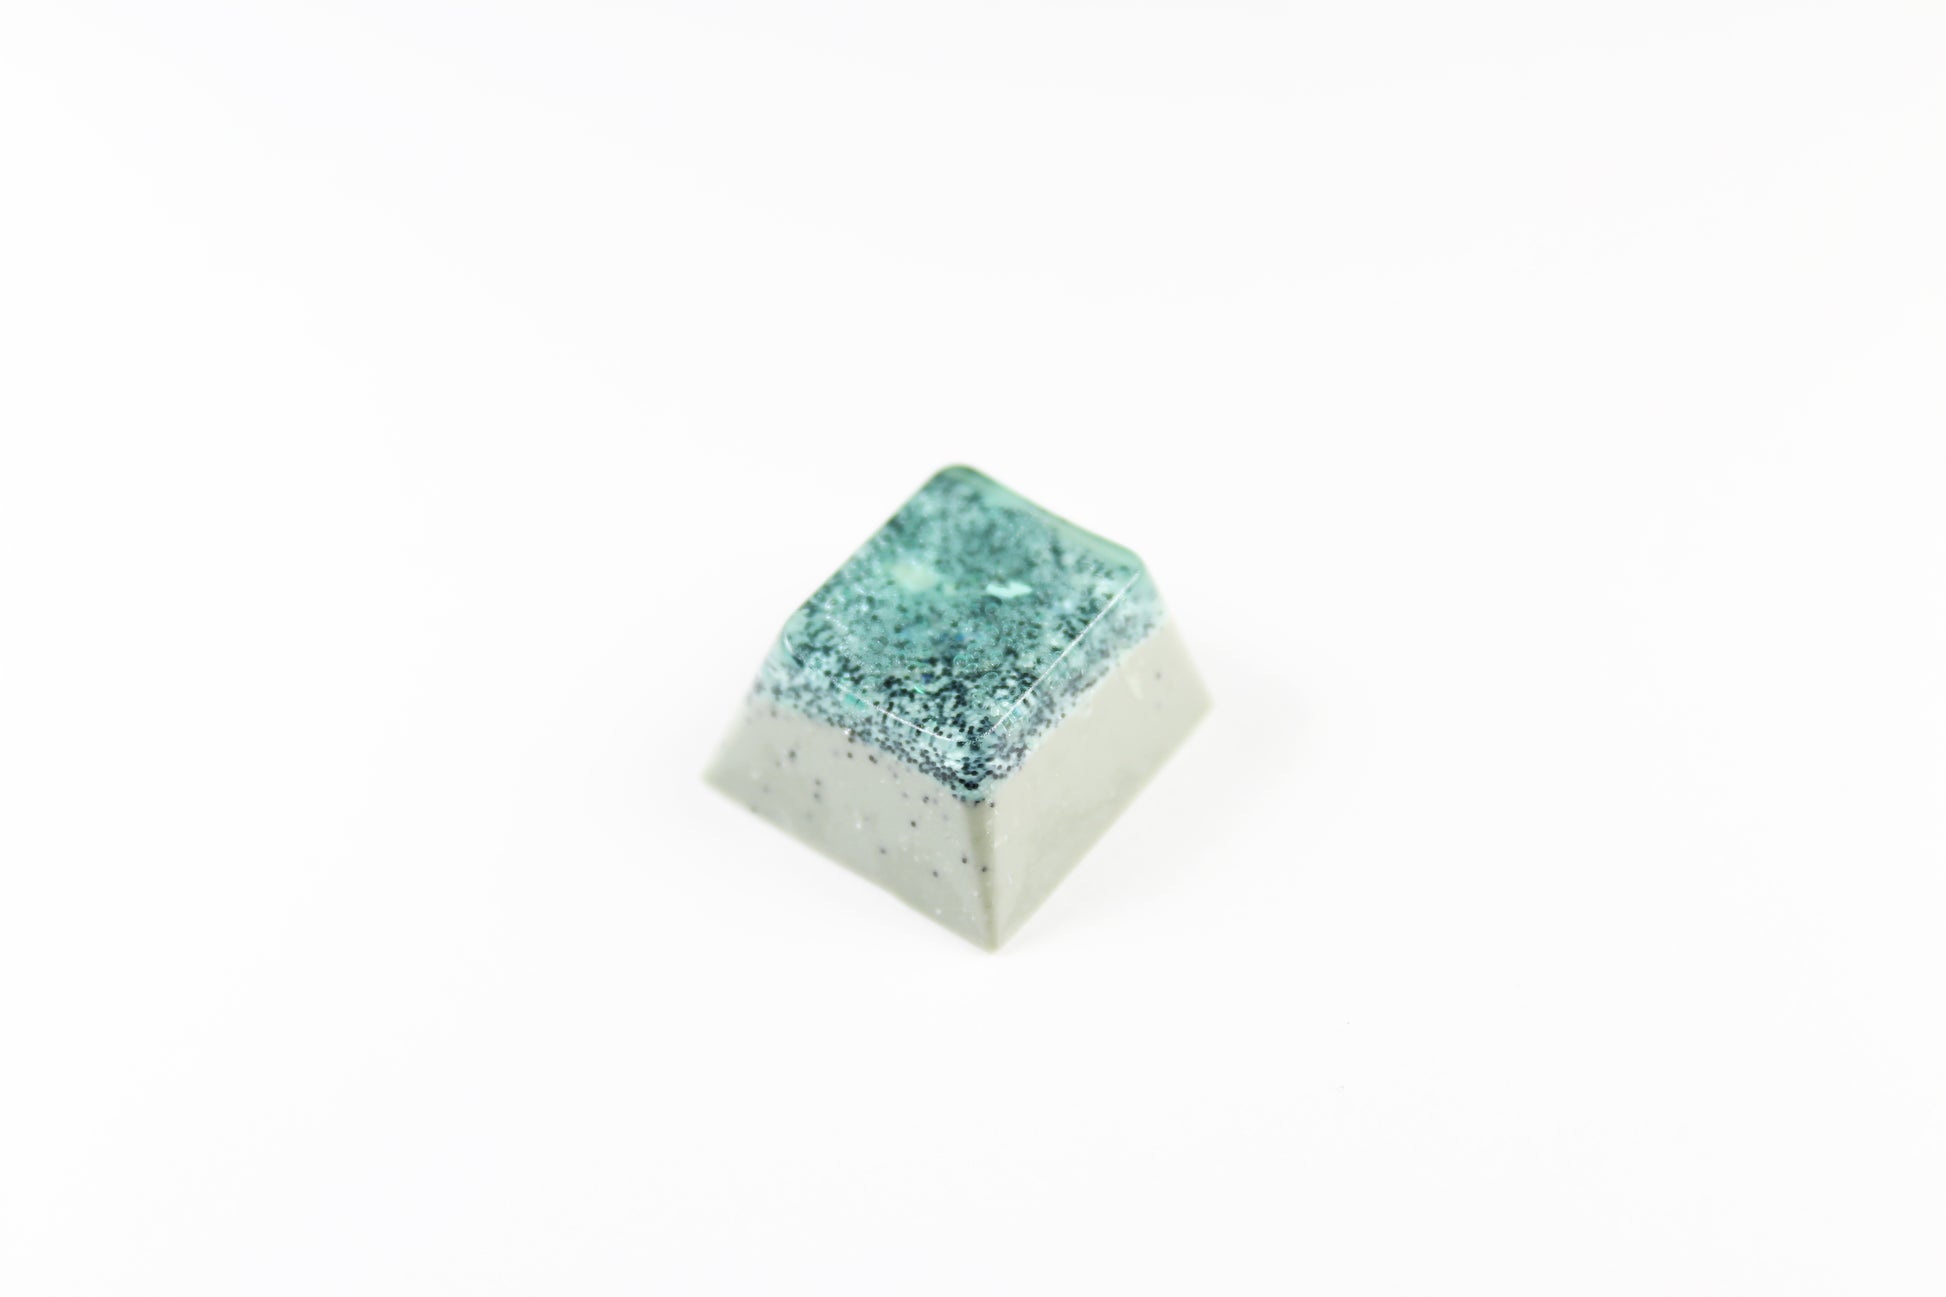 Cherry Esc - Anchor Point -4 - PrimeCaps Keycap - Blank and Sculpted Artisan Keycaps for cherry MX mechanical keyboards 